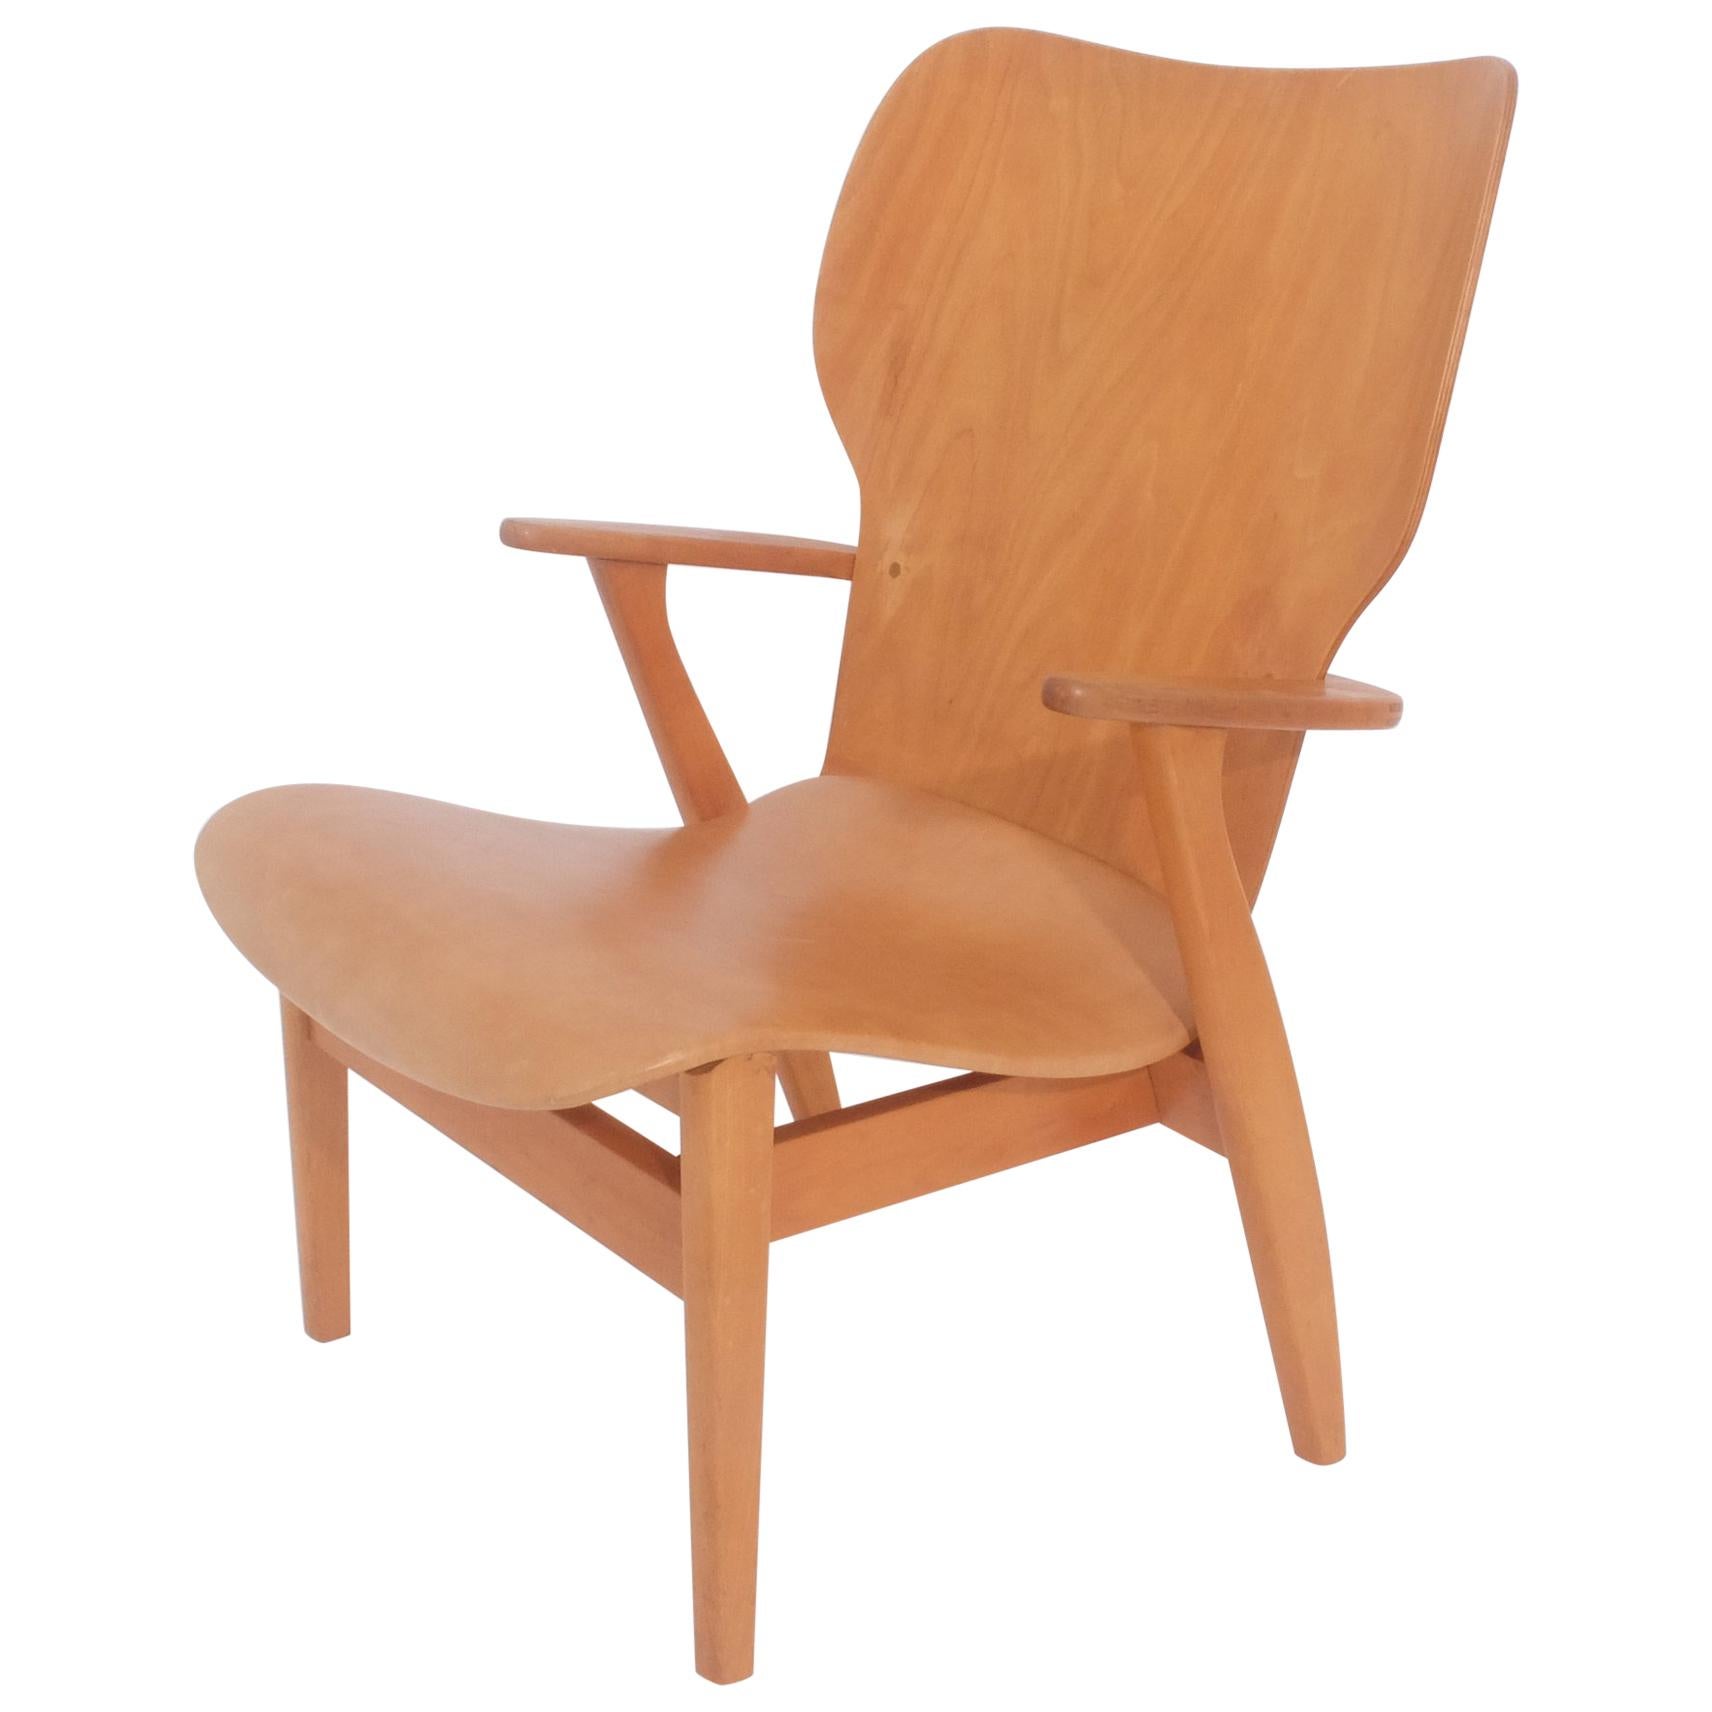 Tapiovaara "High Back Lounge Chair" for Domus Academy 1948 Signed Keravan Puuteo For Sale